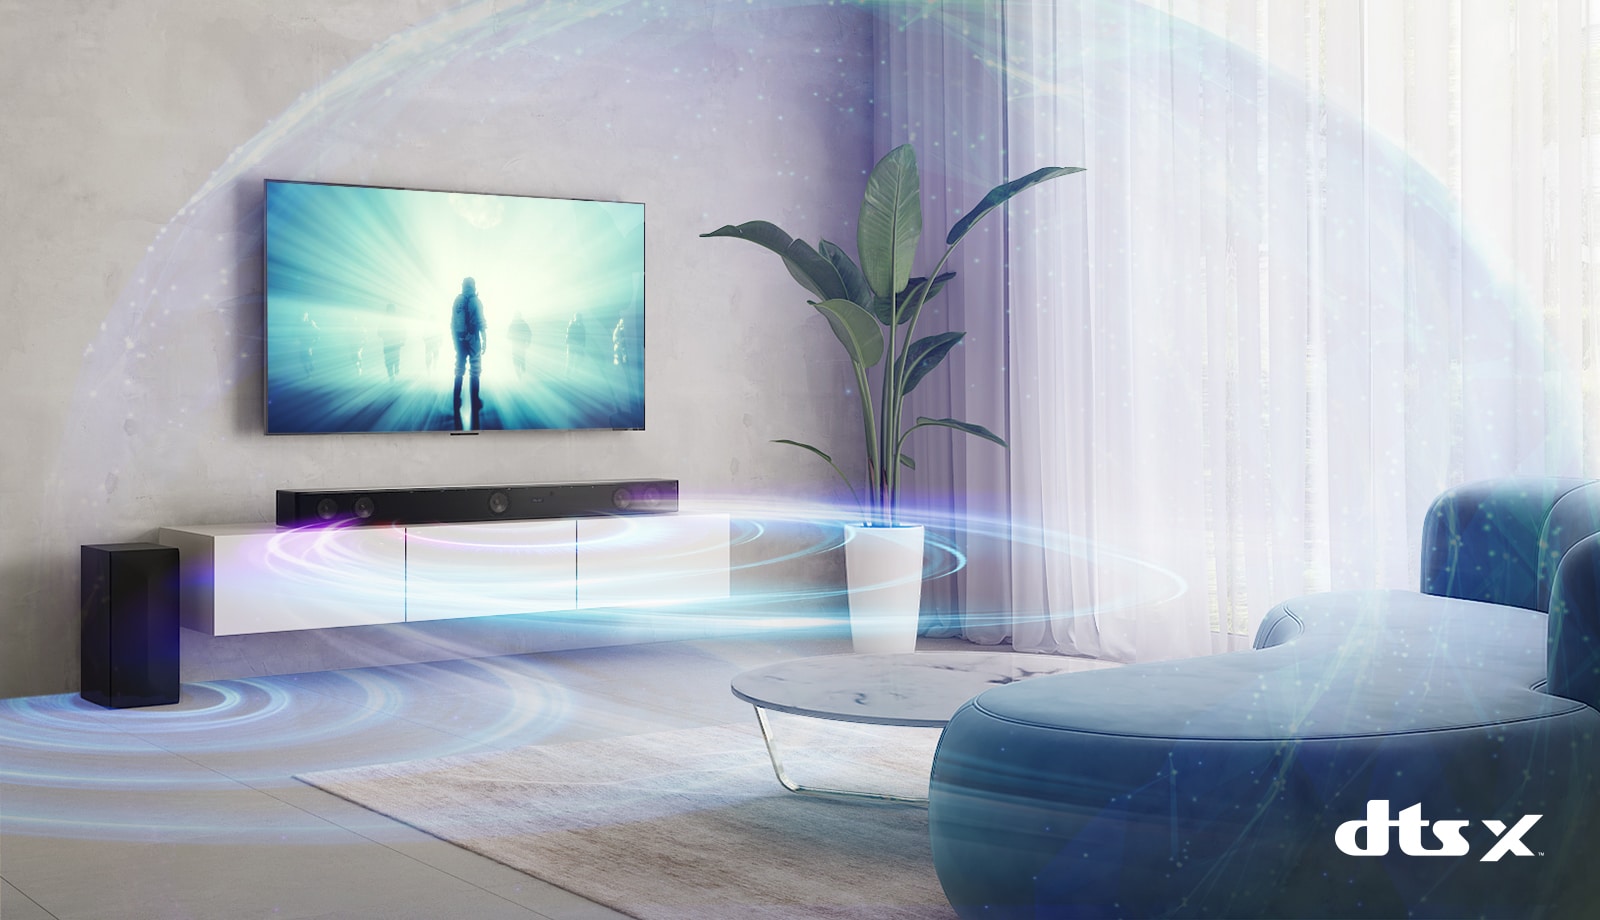 In the living room, LG TV is on the wall. A moive is playing on TV screen. LG Sound bar is right below TV on a beige shelf with a rear speaker is placed on left. Dolby Atmos Virtual logo shown on right bottom of image.